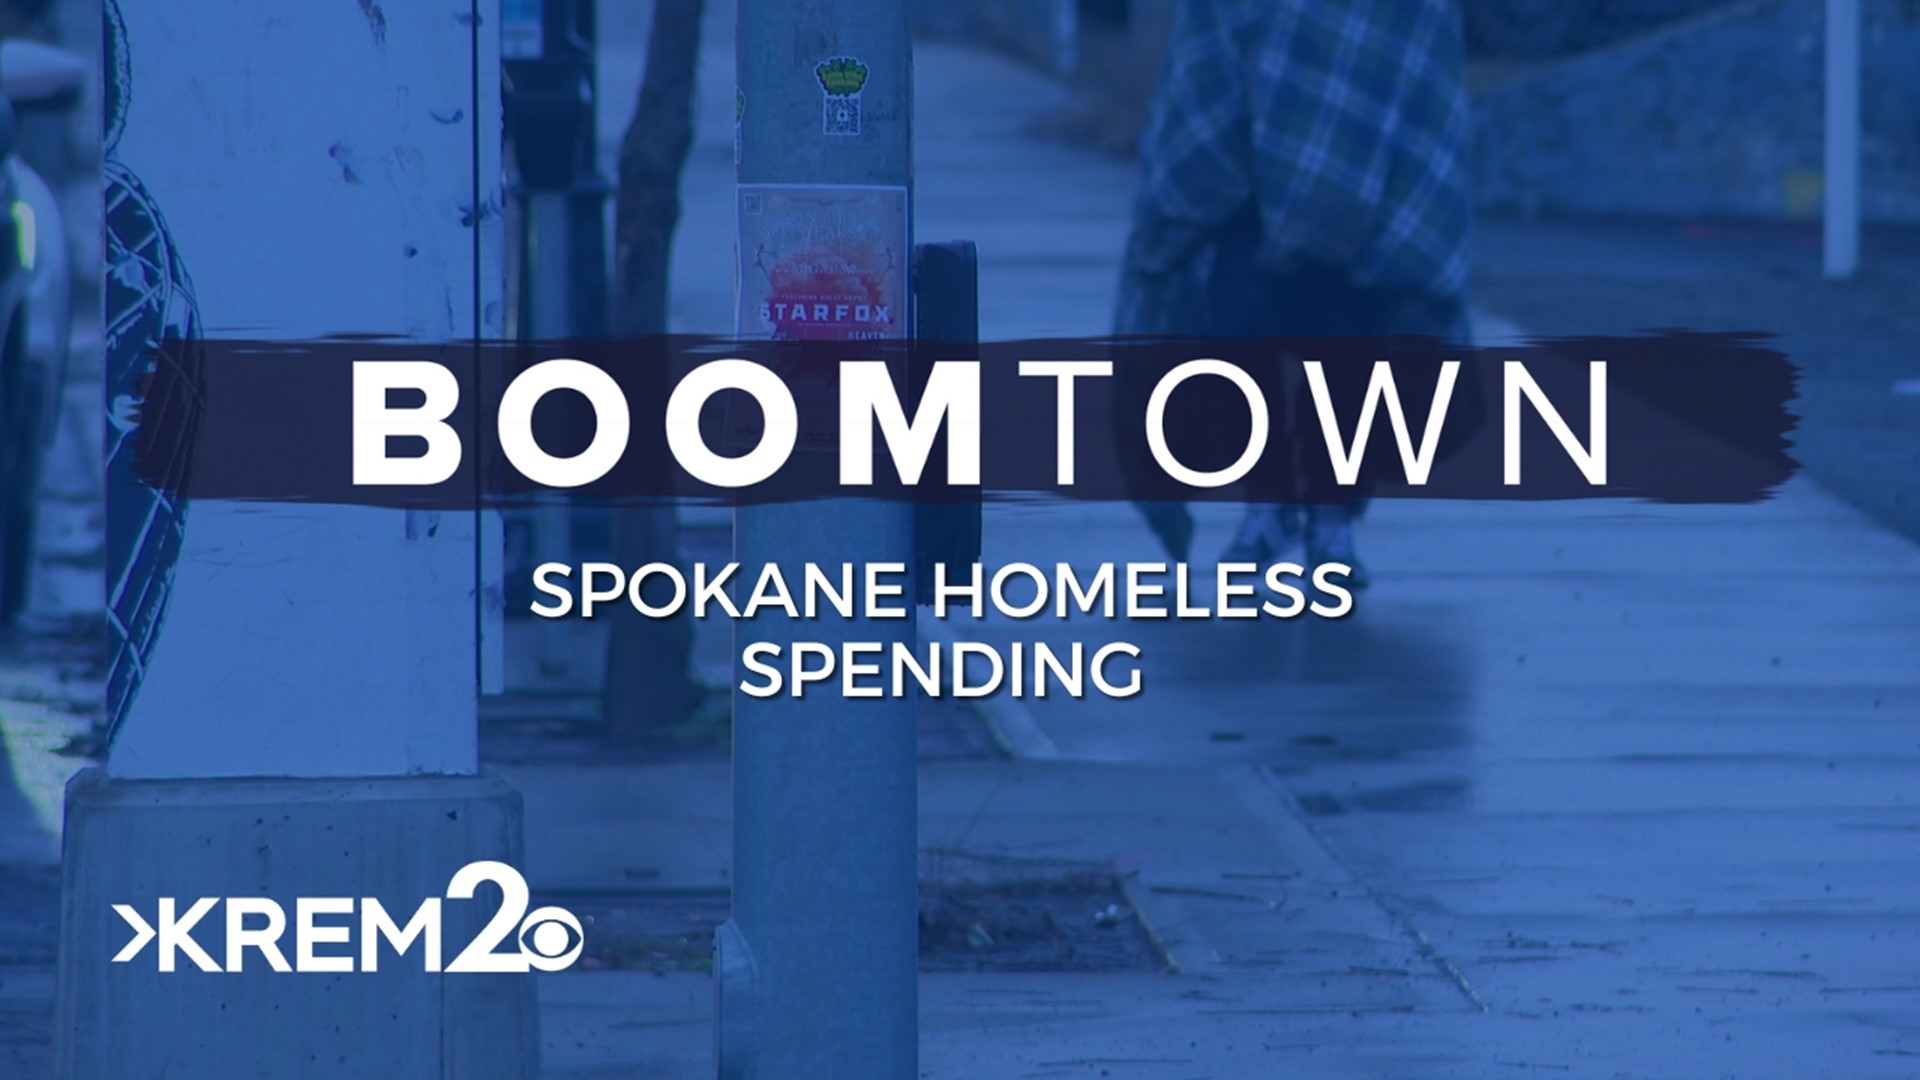 With COVID-19 relief funding running out, many advocates say more money and resources are needed, but the amount of homeless people continues to rise.